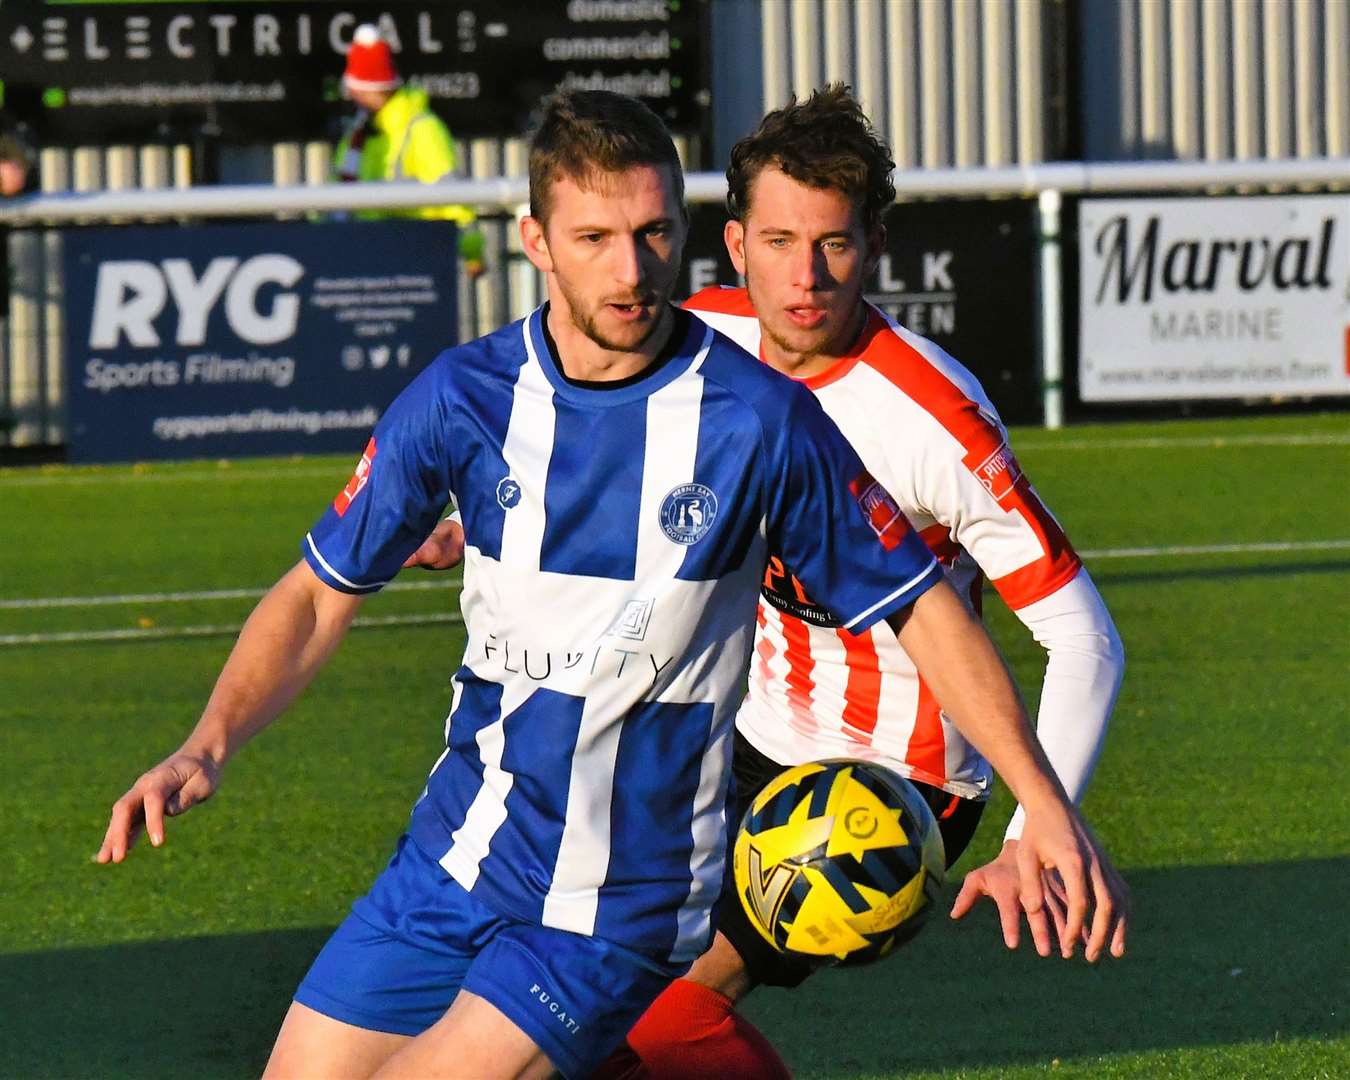 Herne Bay frontman Kane Rowland - is expected to be fit to play this weekend, despite taking a bad whack in their 2-2 draw at Merstham. Picture: Marc Richards